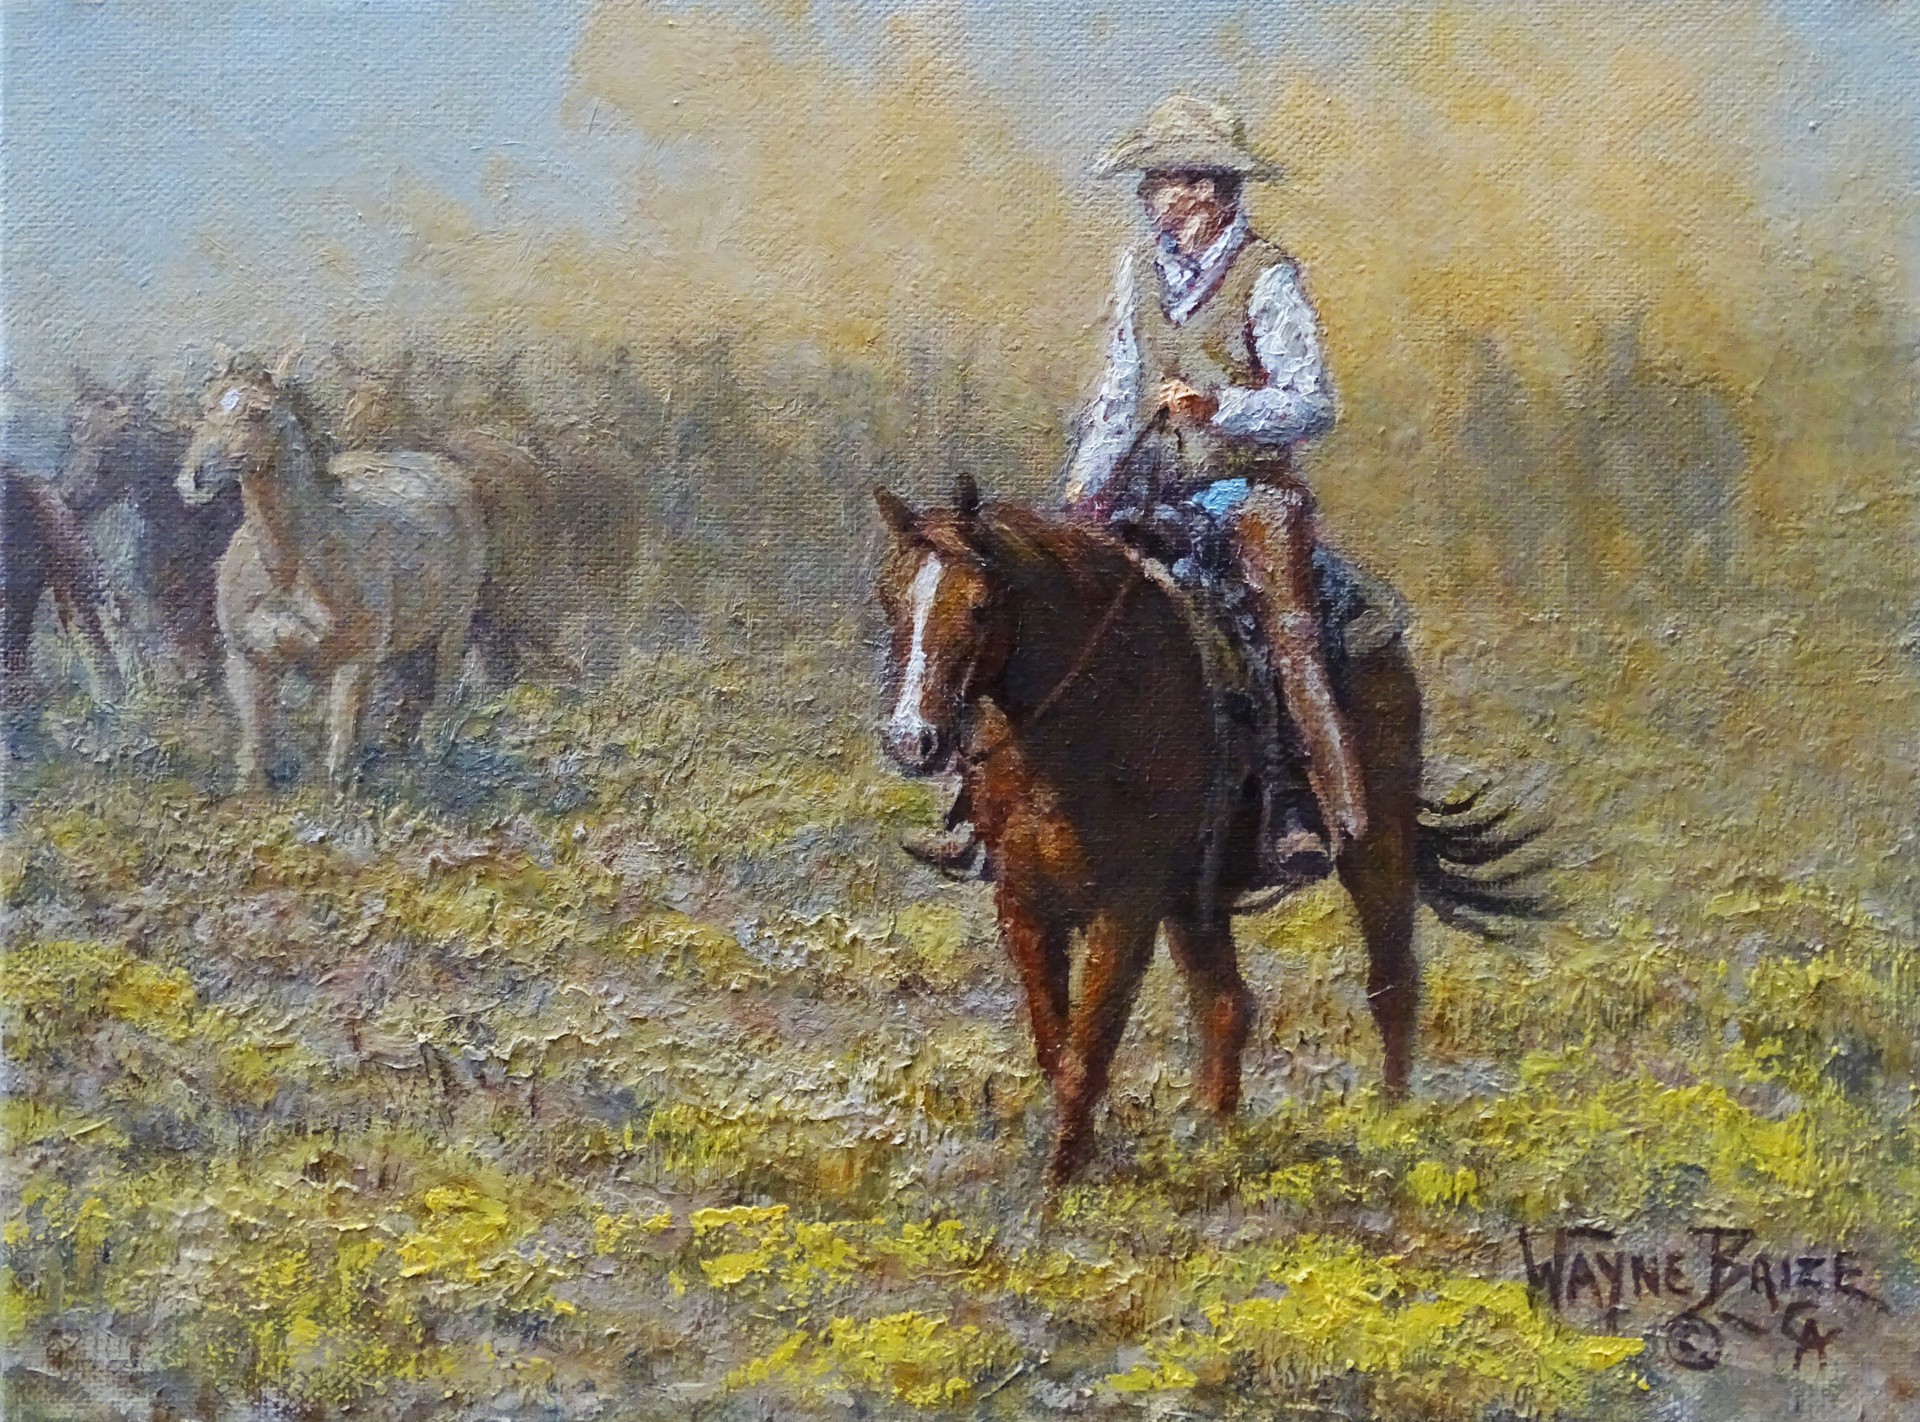 Out of the Dust by Wayne Baize